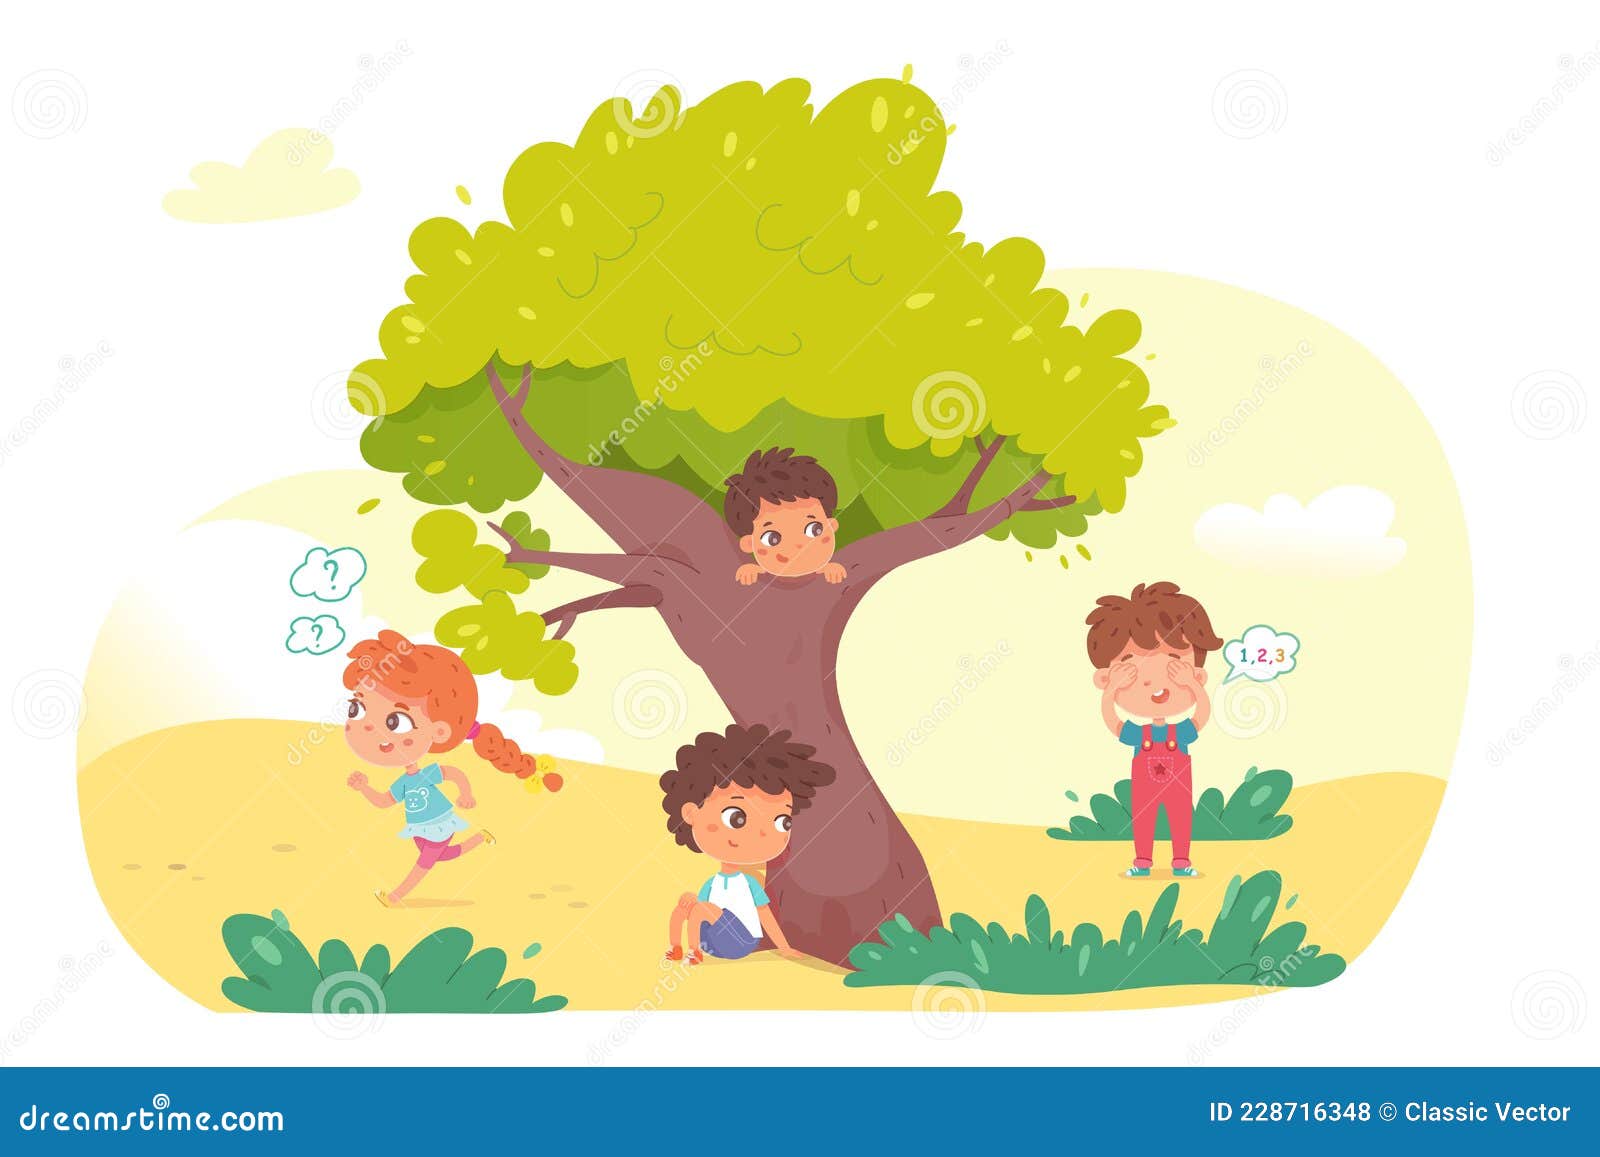 little kids playing hide and seek in park. playing game with friends outdoor in summer vacations  